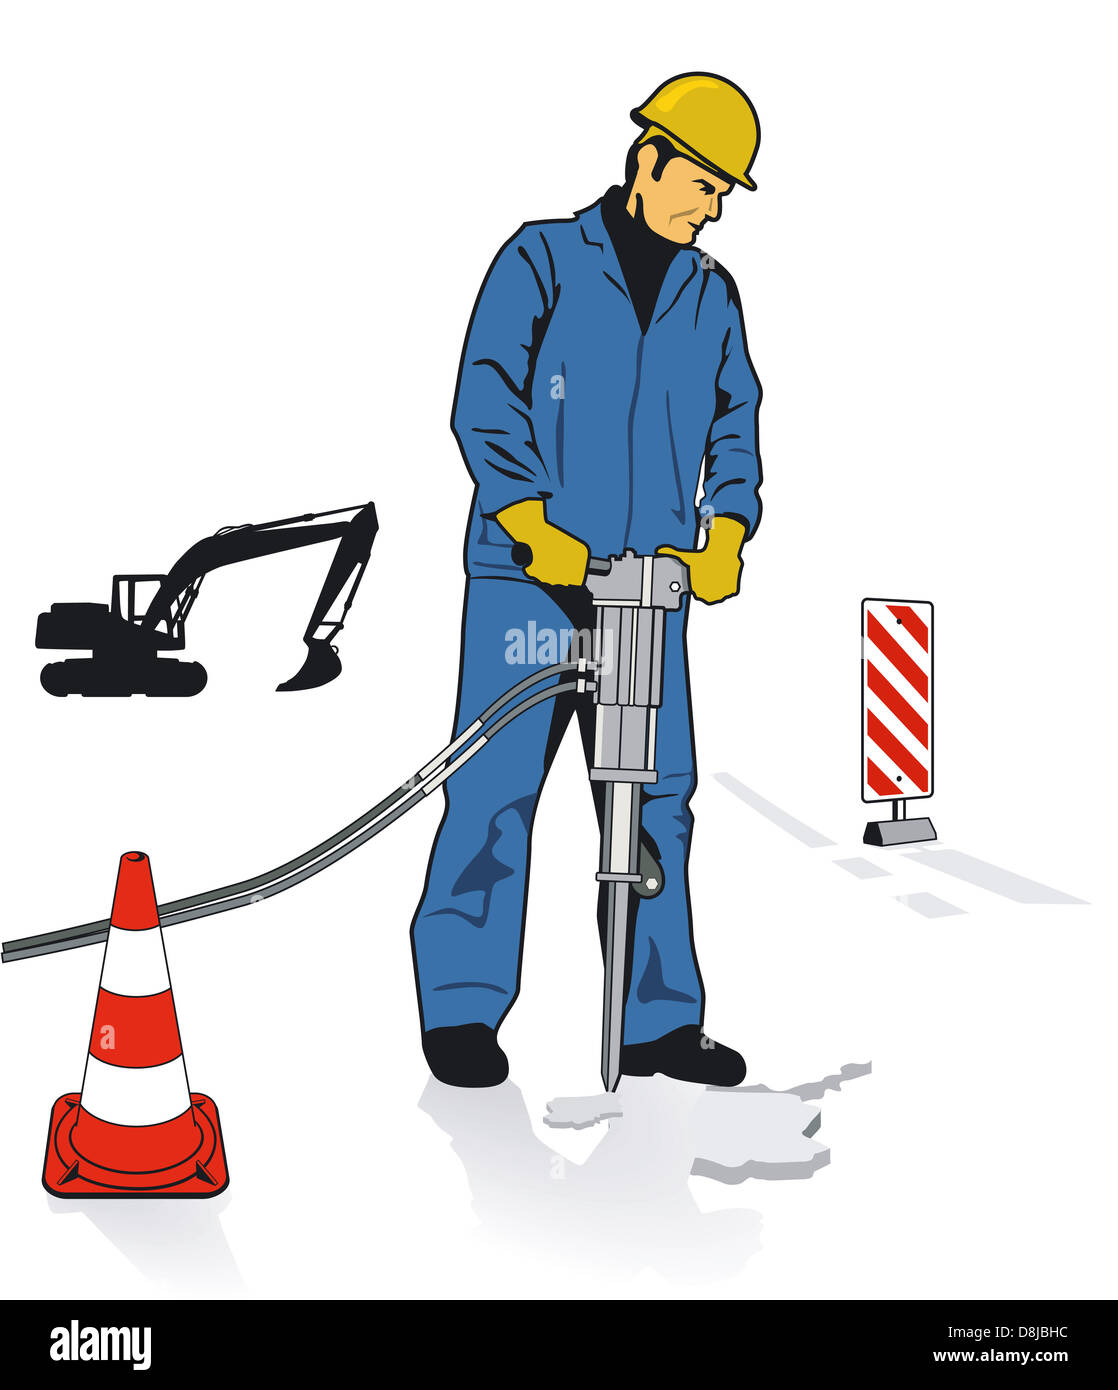 Workers with jackhammers Stock Photo